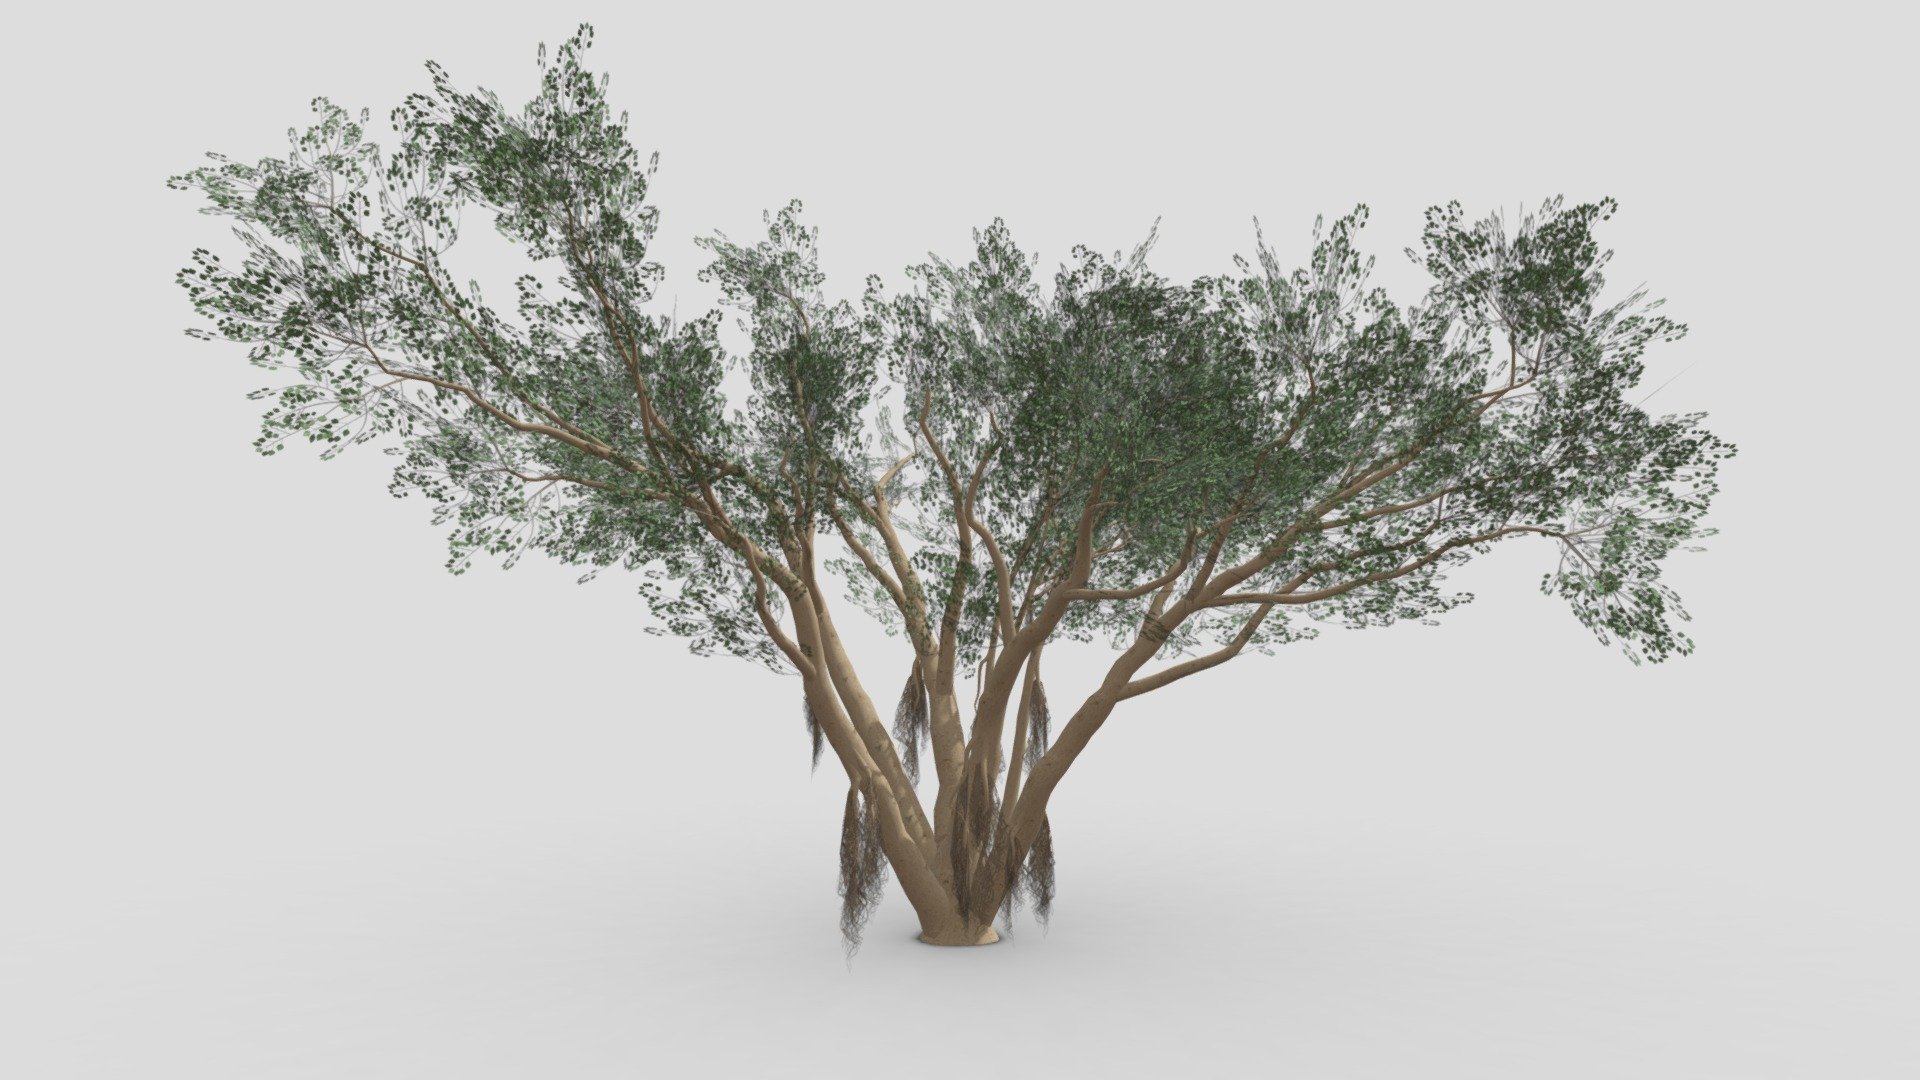 I try to work on Ficus Benjamina Tree to use this your project. this is a low poly 3D model. Tree info: Ficus Benjamina, commonly known as weeping fig, benjamin fig, or ficus tree, and often sold in stores as just ficus, is a species of flowering plant in the family Moraceae, native to Asia and Australia. It is the official tree of Bangkok 3d model